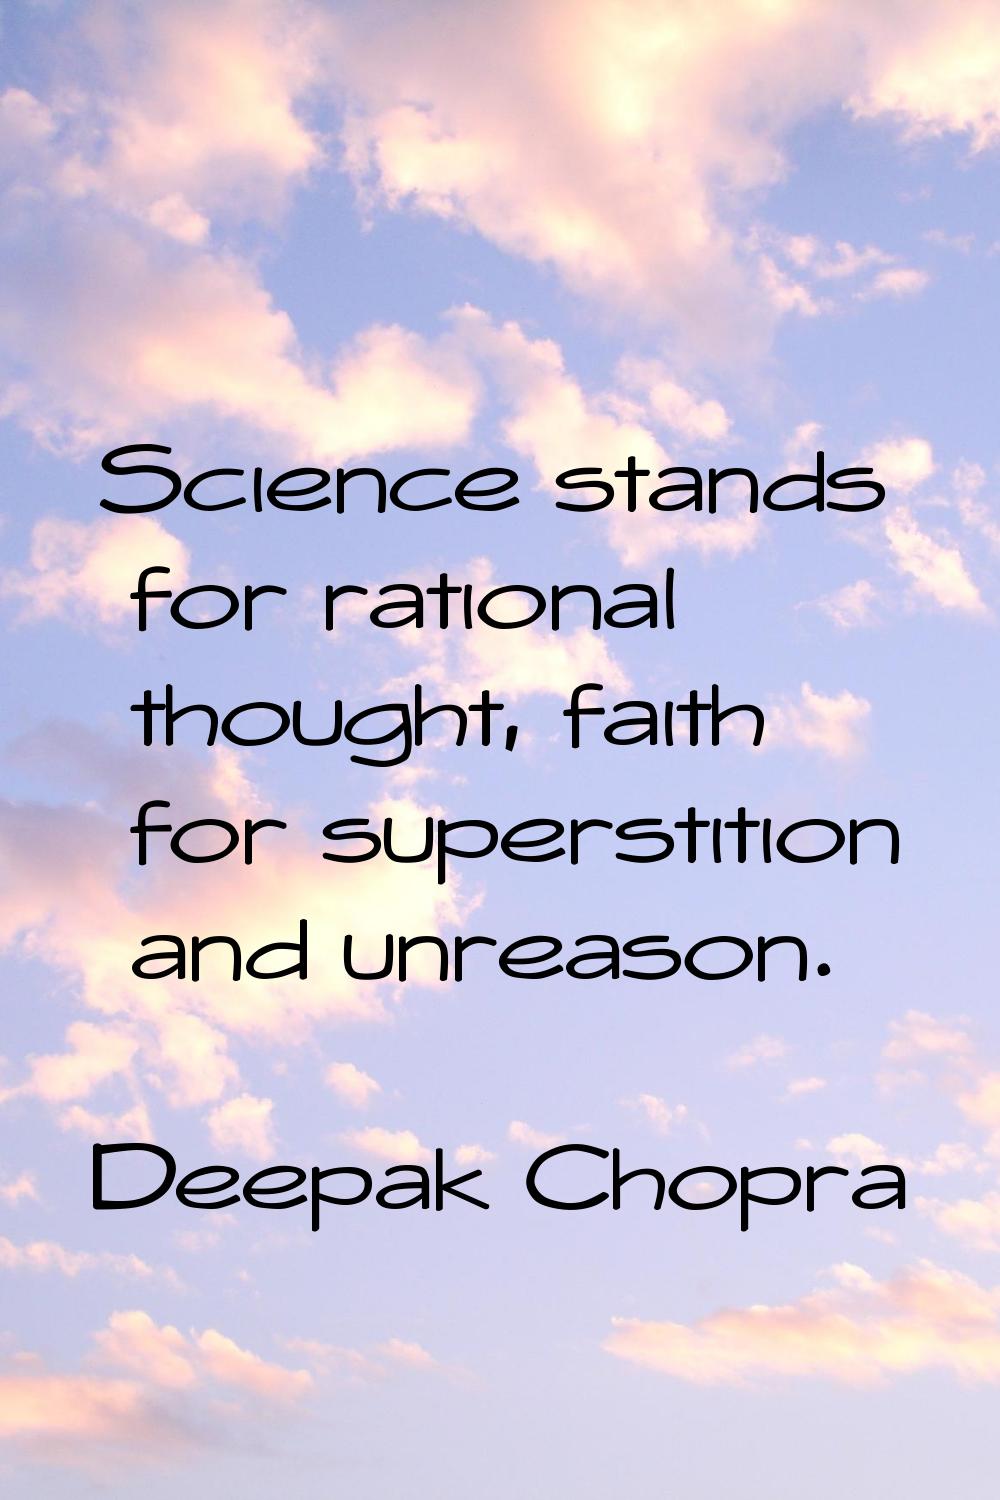 Science stands for rational thought, faith for superstition and unreason.